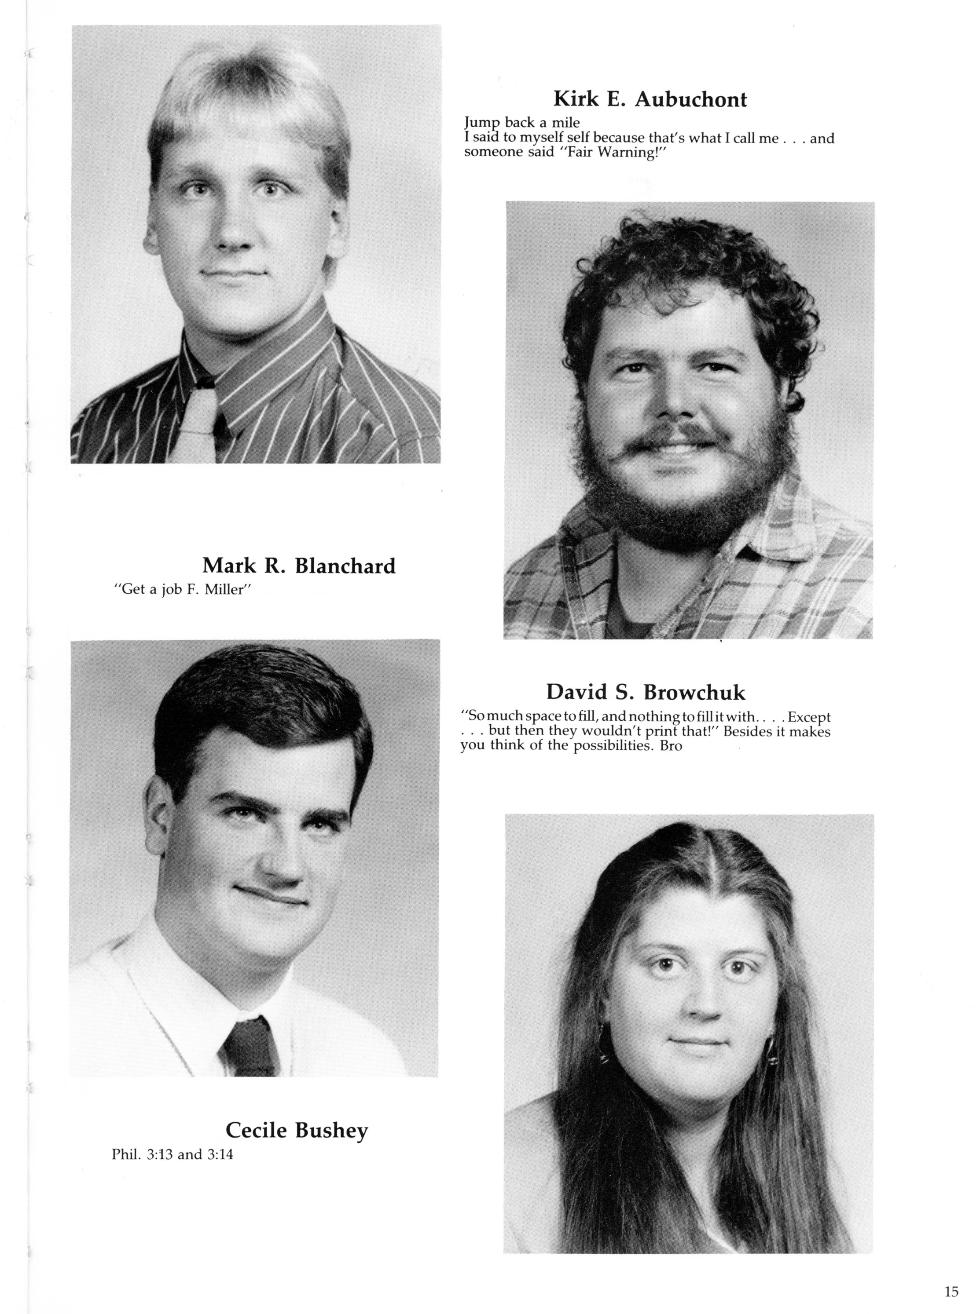 Worcester Industrial Technical Institute Class of 1987 Yearbook Architecture & Construction - Kirk Aubuchont Marki Blanchard David Browchuck Cecile Bushey